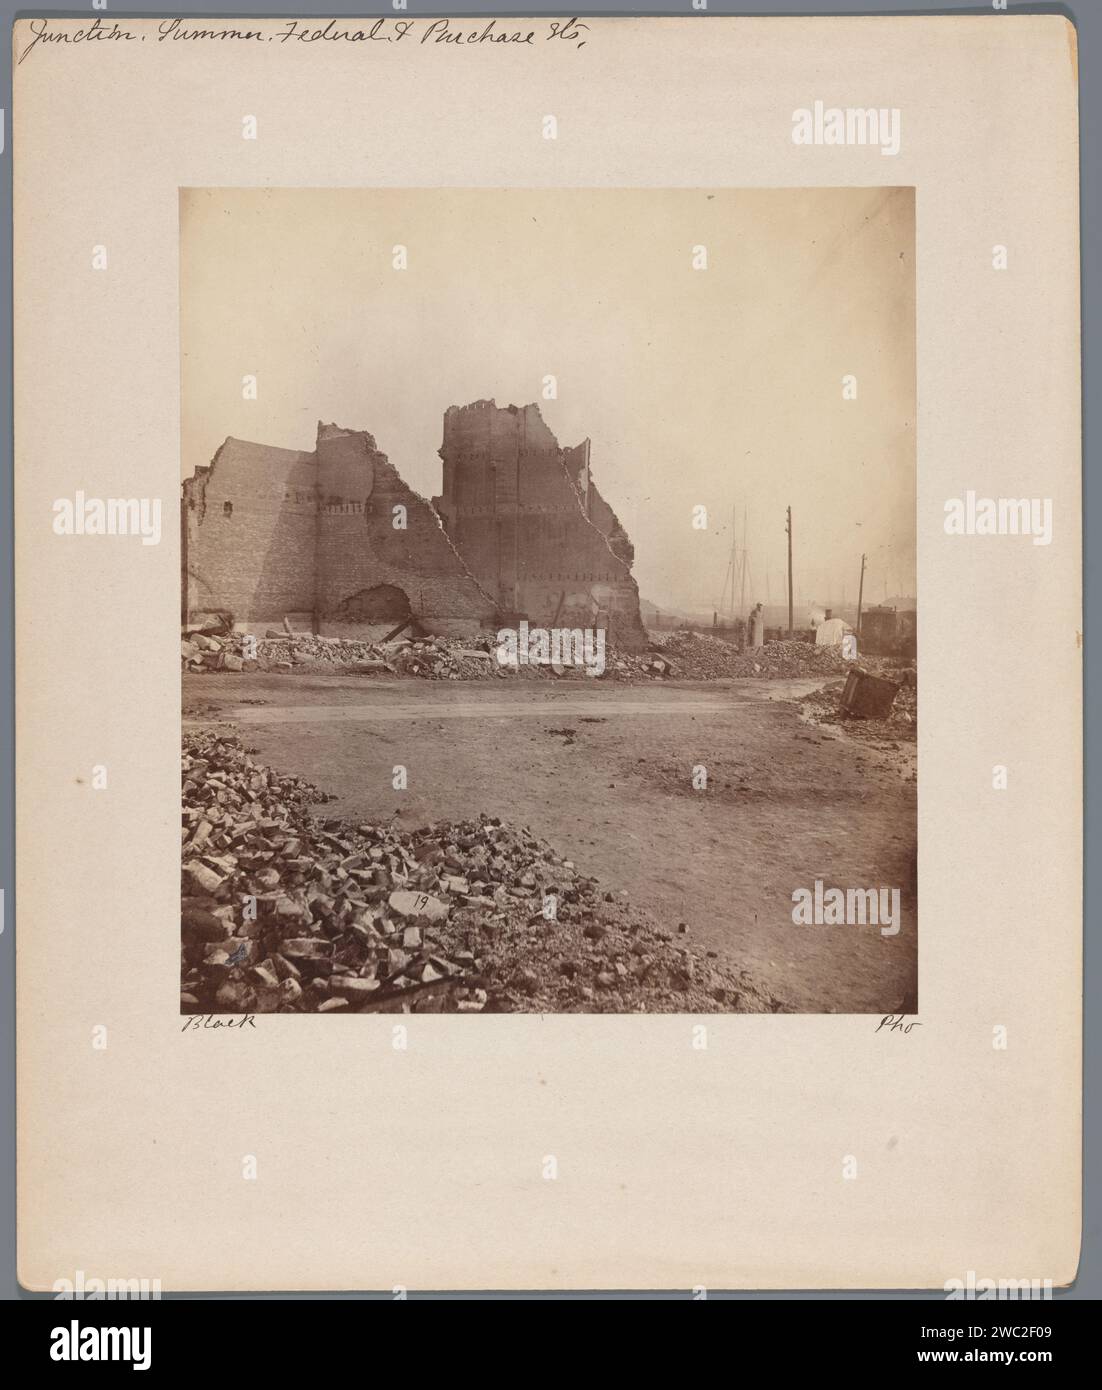 Ruins after the Great Boston Fire of 1872 at the intersection of Summer, Federal and Purchase Street, James Wallace Black, 1872 photograph  Boston cardboard. paper albumen print ruin of a building  architecture Boston Stock Photo